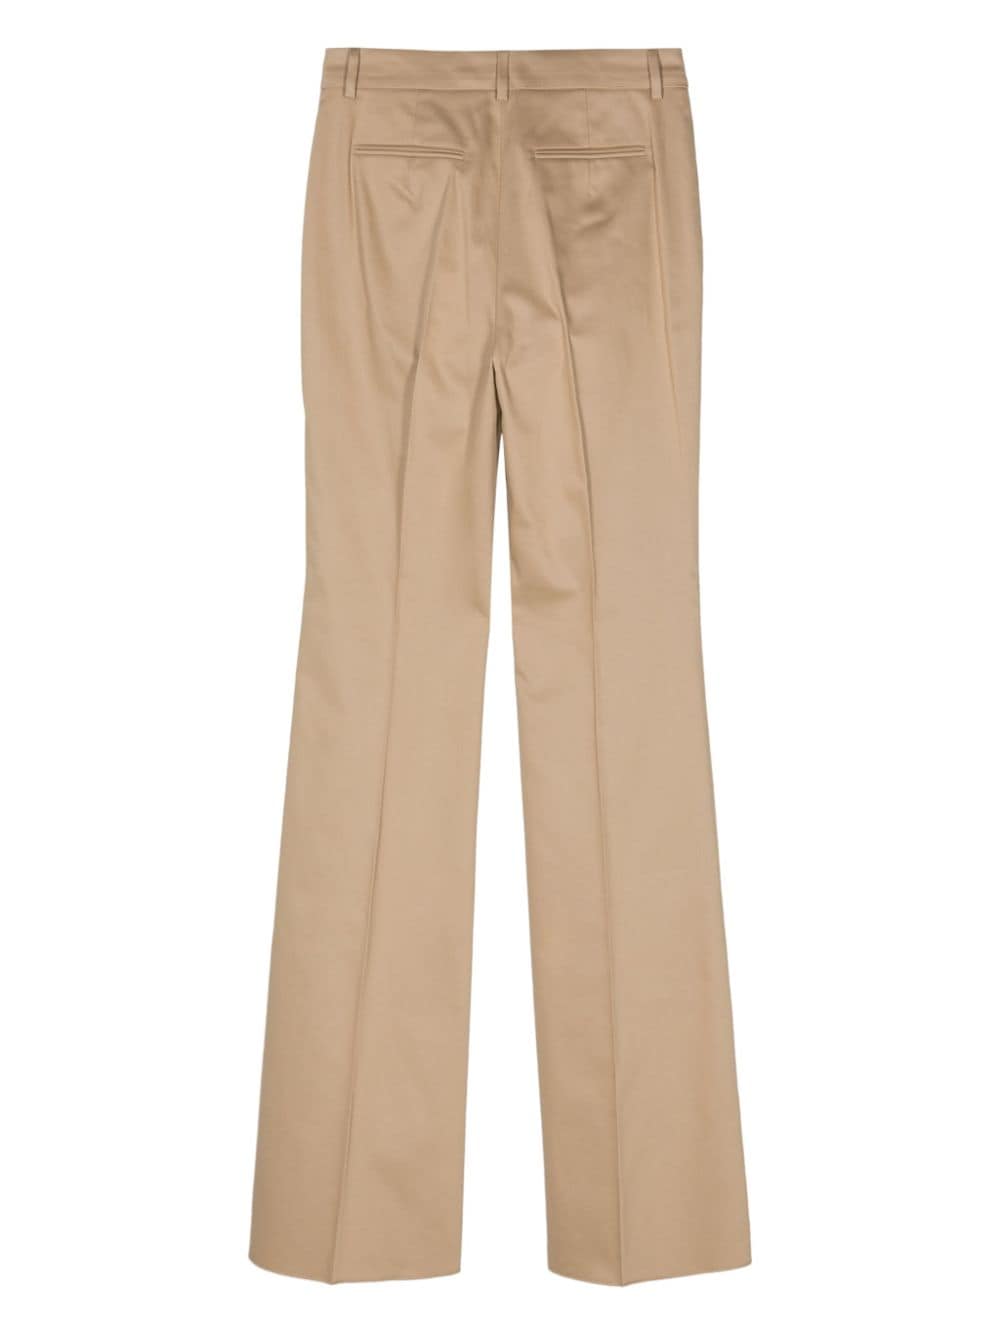 Sportmax Norcia flared tailored trousers - Beige